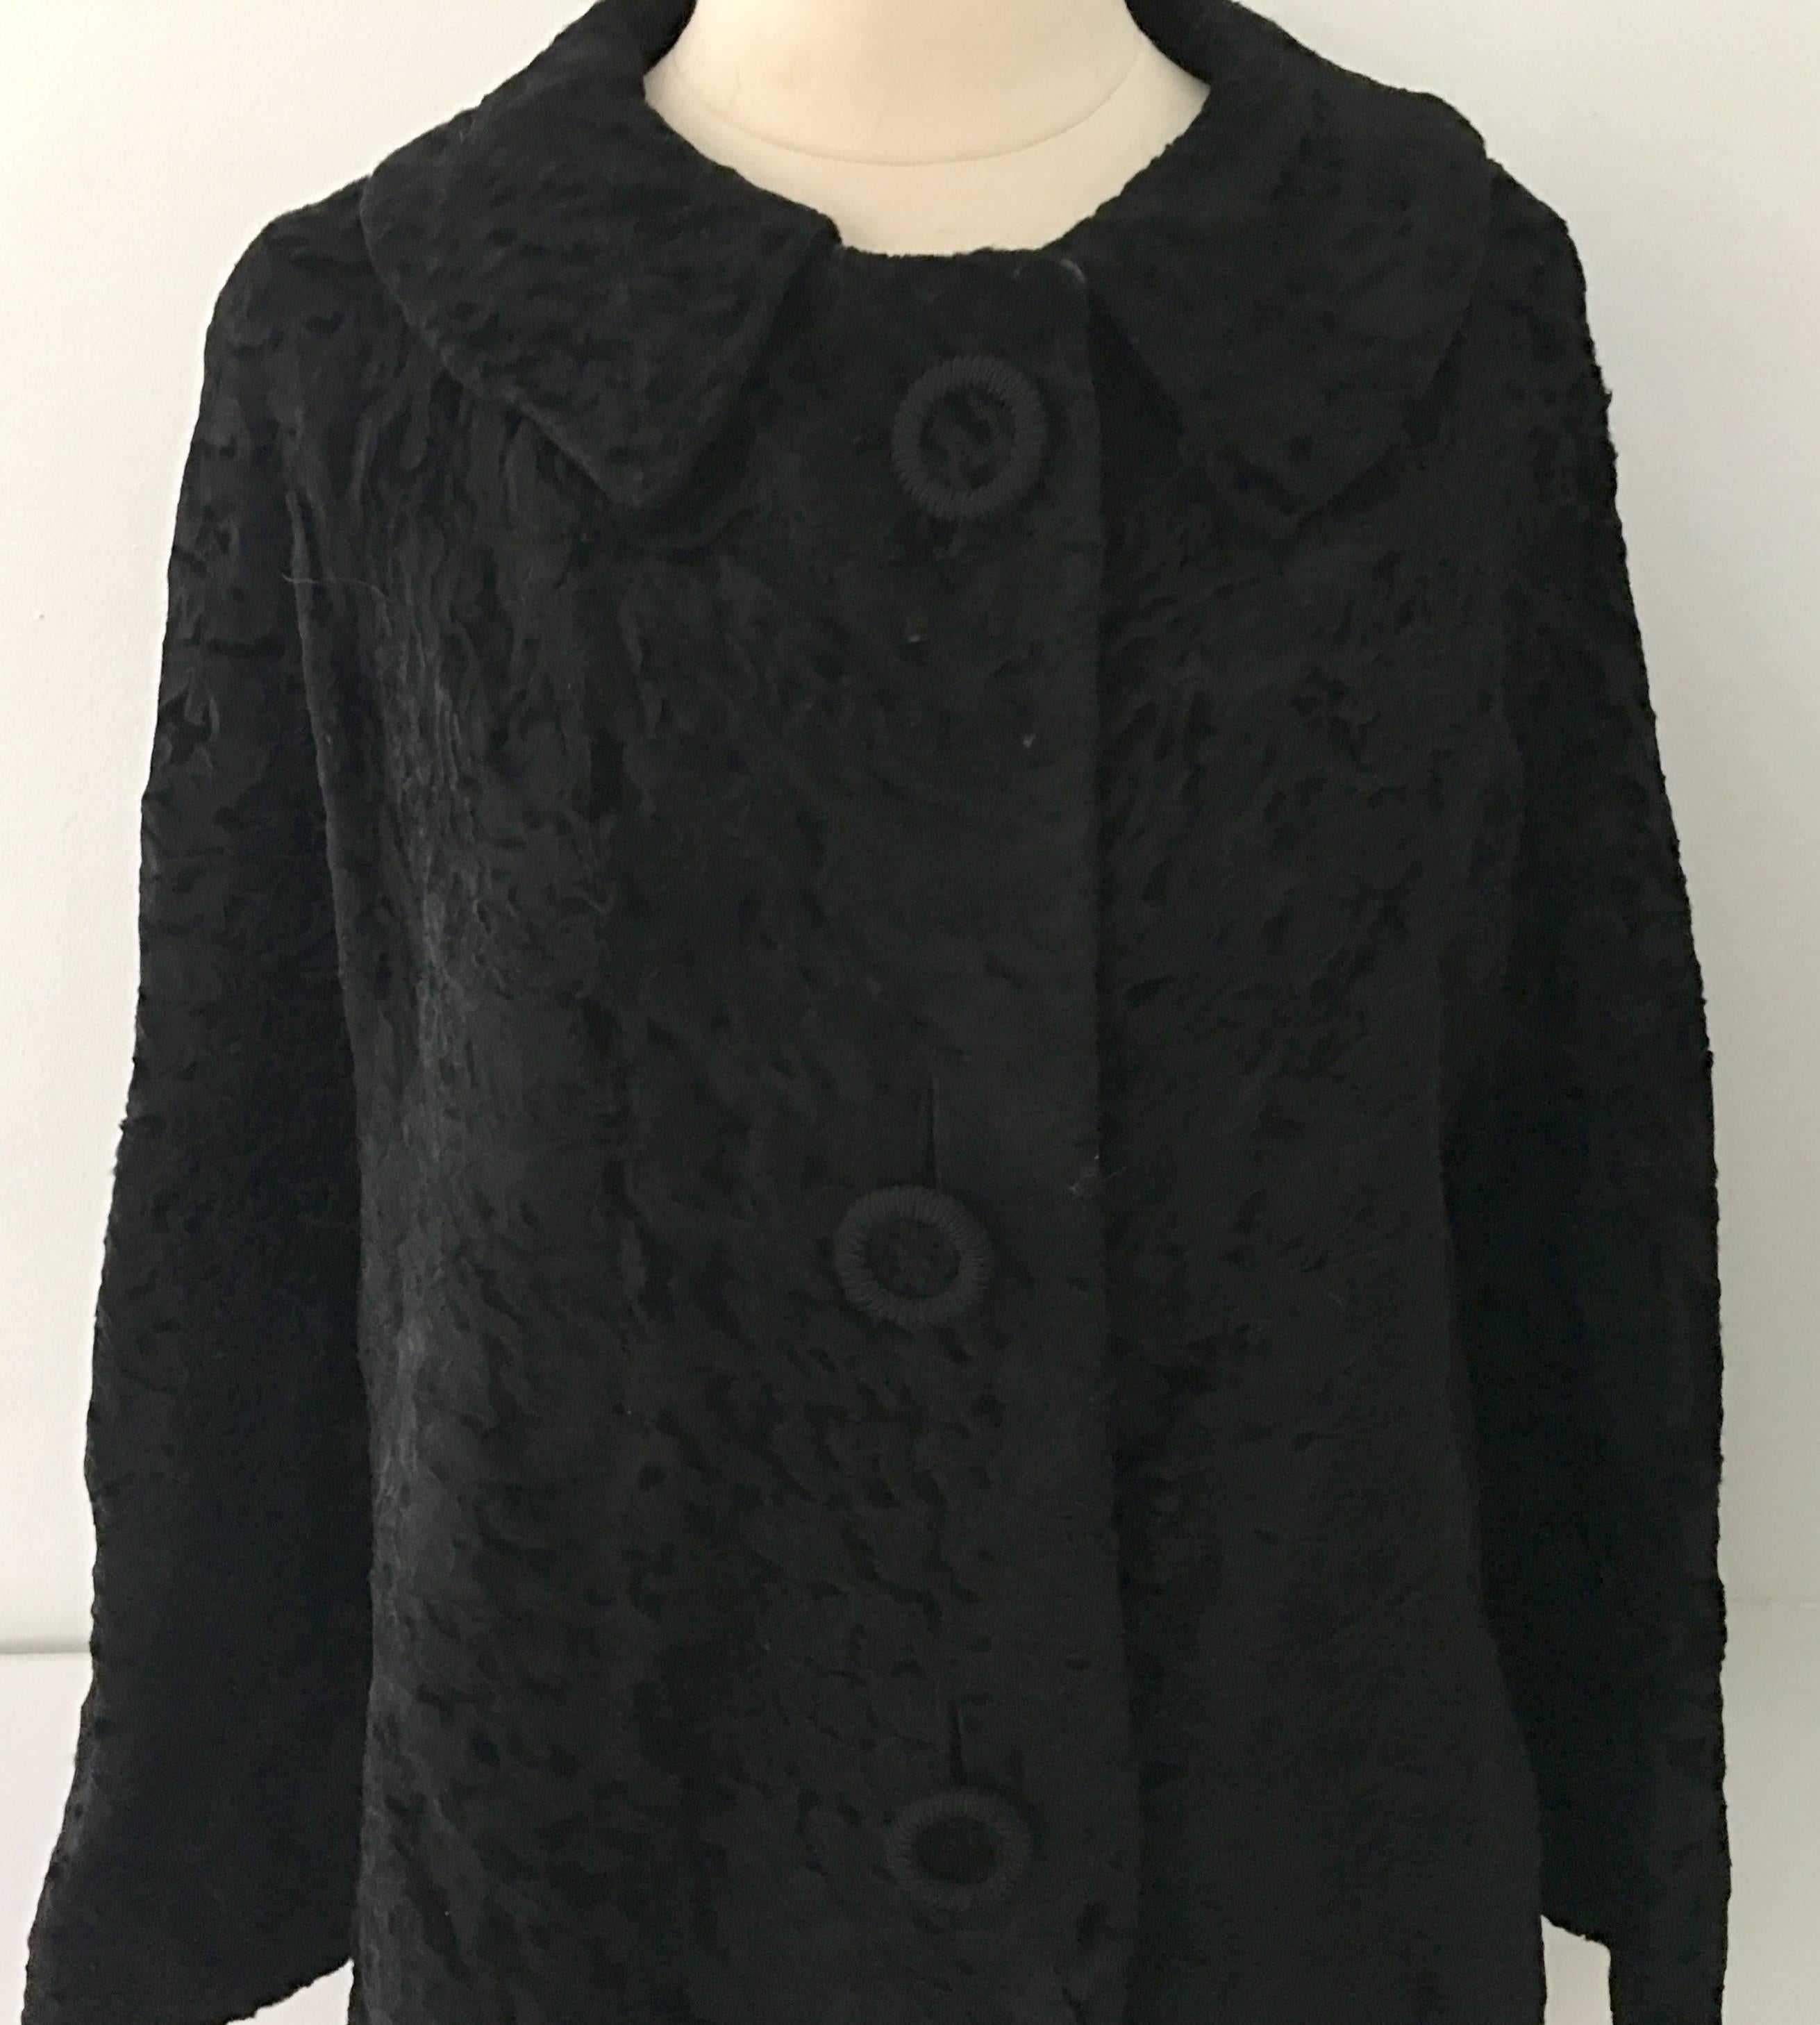 Vintage Black Persian Lamb Fur Swing Coat In Excellent Condition For Sale In West Palm Beach, FL